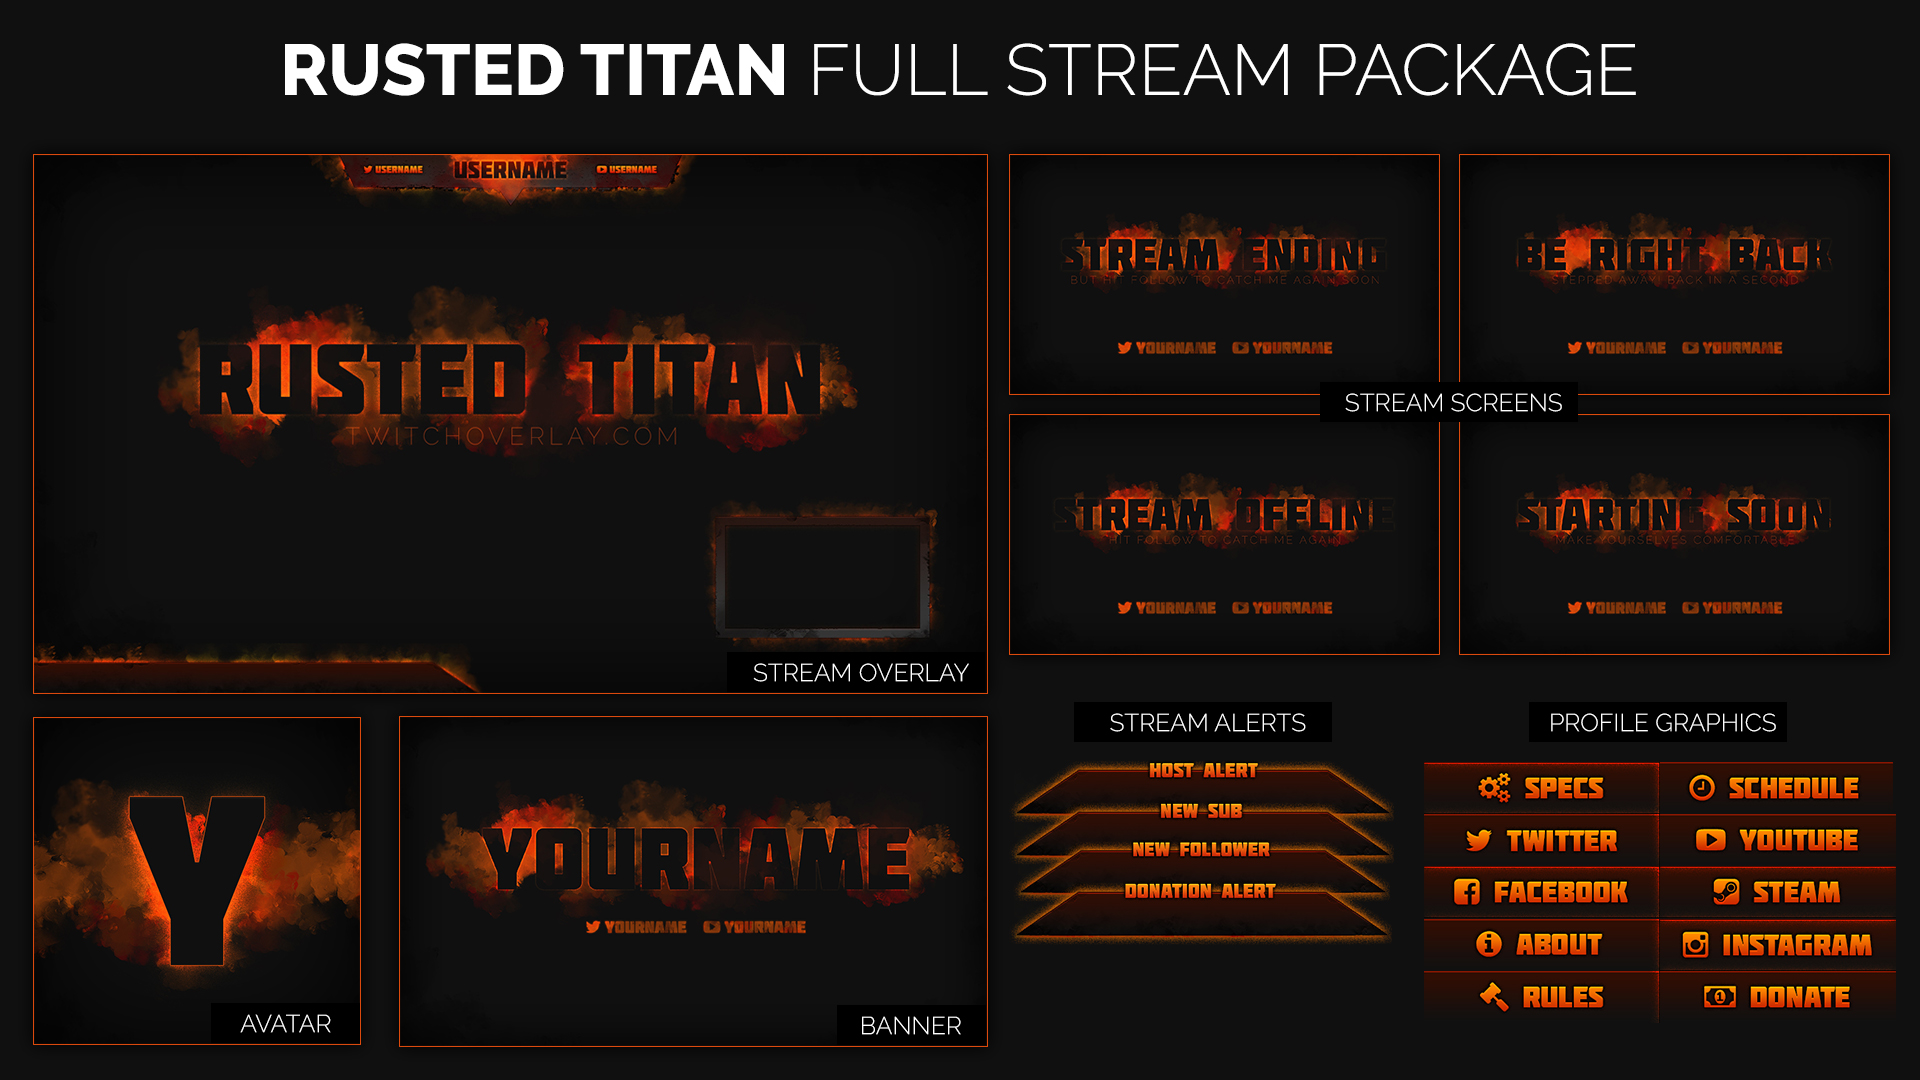 Rusted Titan Full Stream Package added